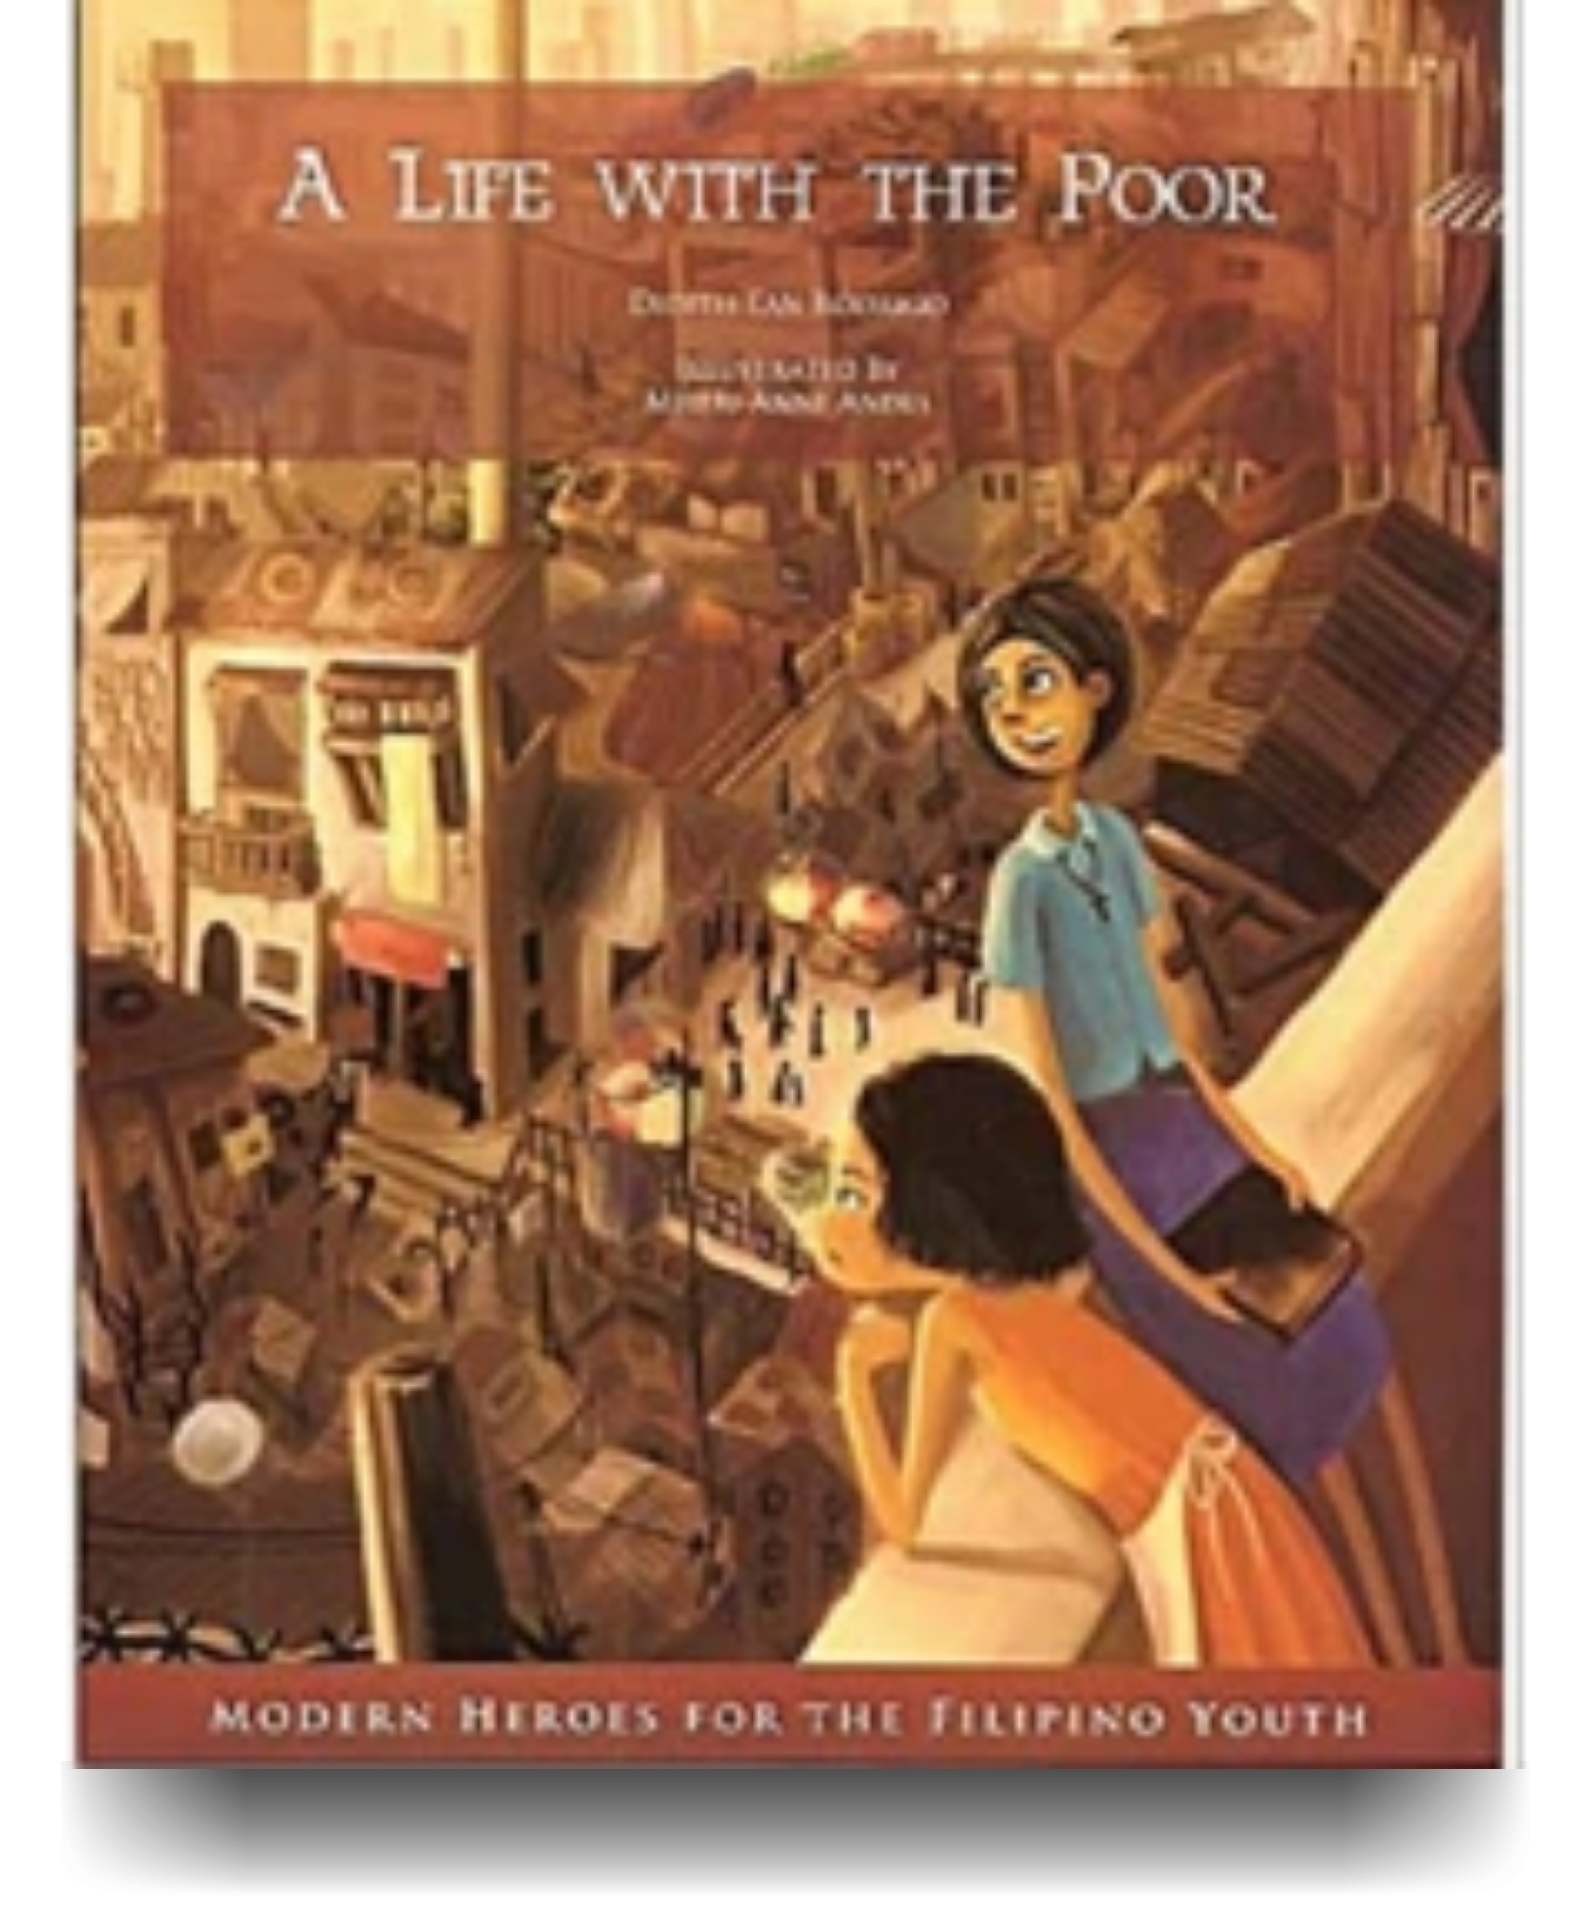 A Life With The Poor (Modern Heroes For The Filipino Youth)